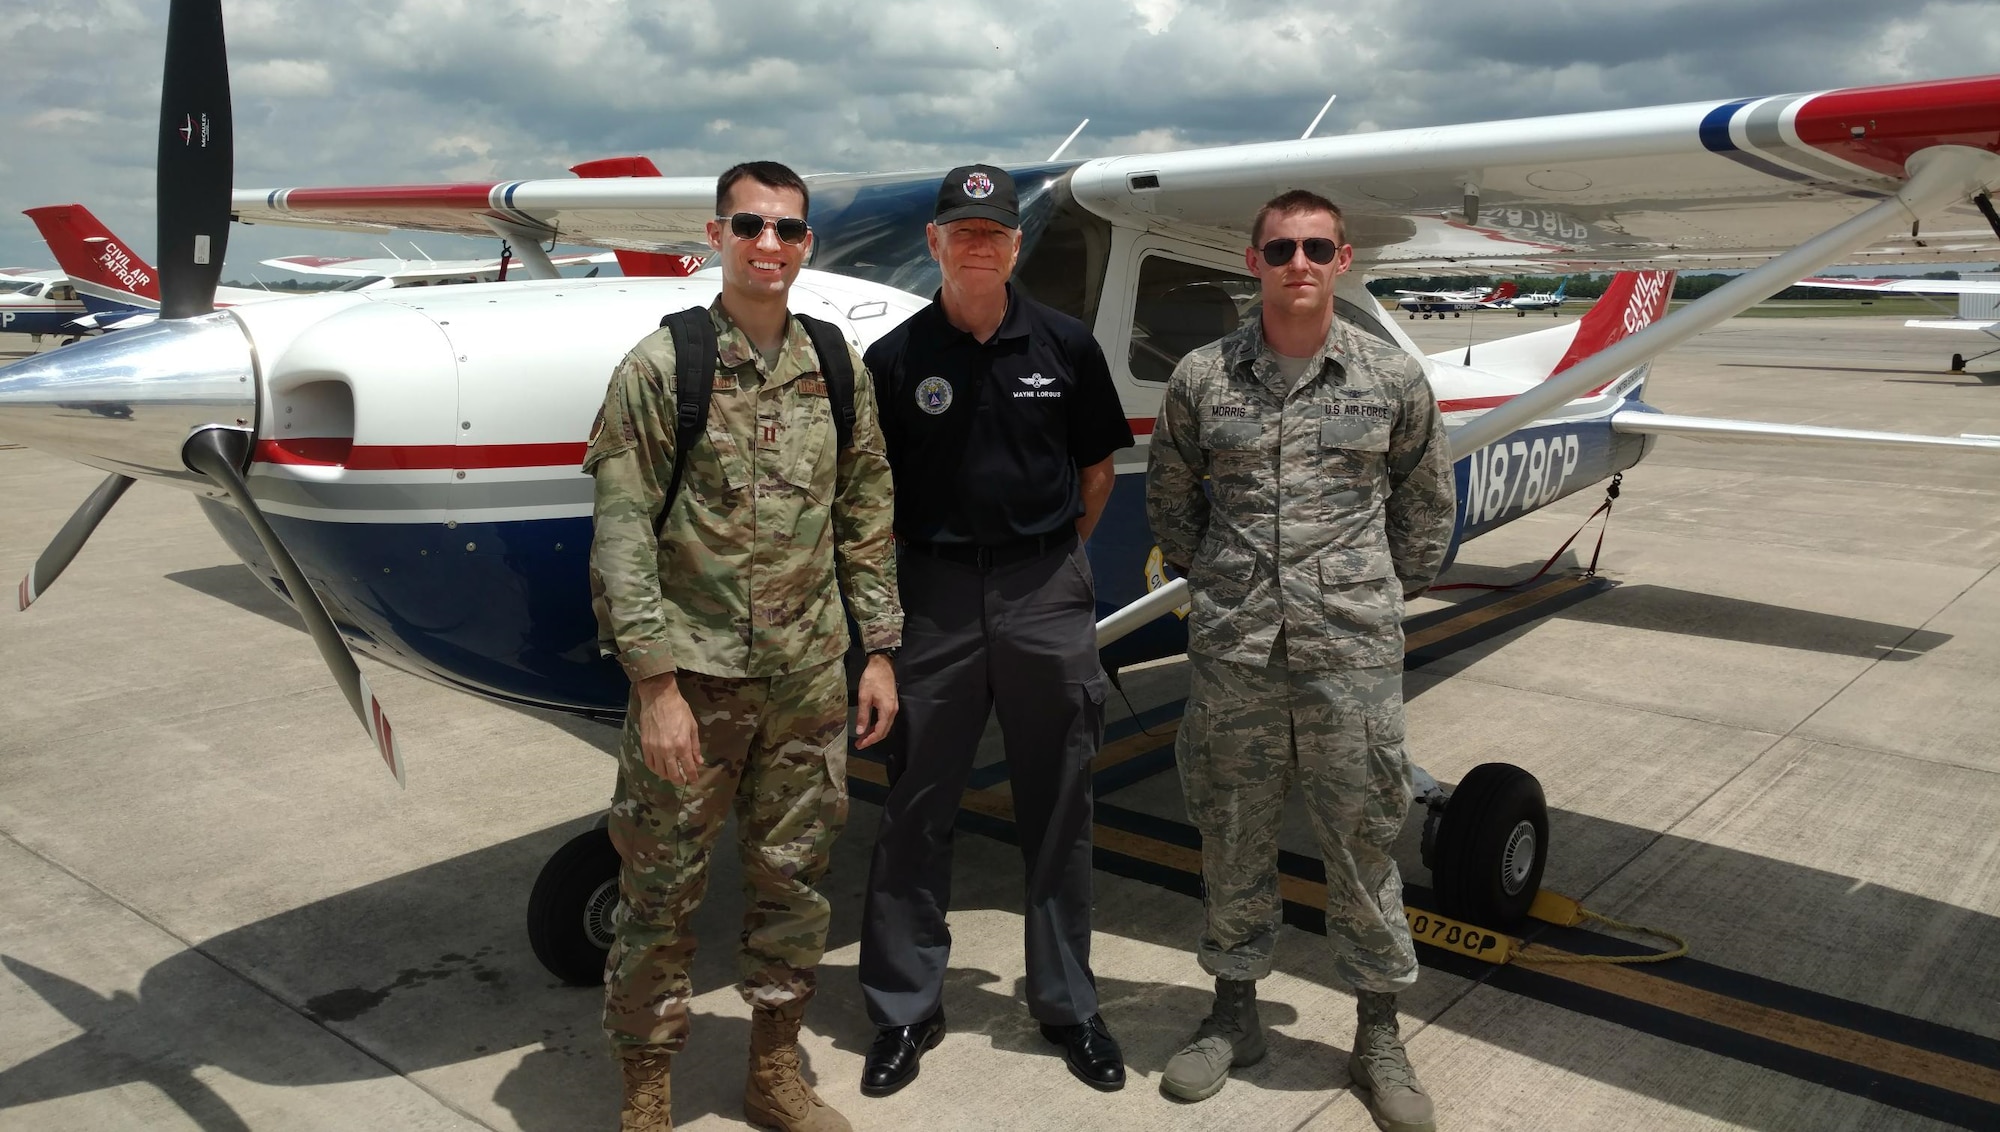 Lt. Col. Wayne Lorgus (center) of the Arizona Wing poses for a photo with Capt. Jared Strickland (left), assigned to Luke Air Force Base, Ariz., and 2nd Lt. Tyler Morris, assigned to Buckley AFB, Colo. (Civil Air Patrol photo by Ron Olienyk)